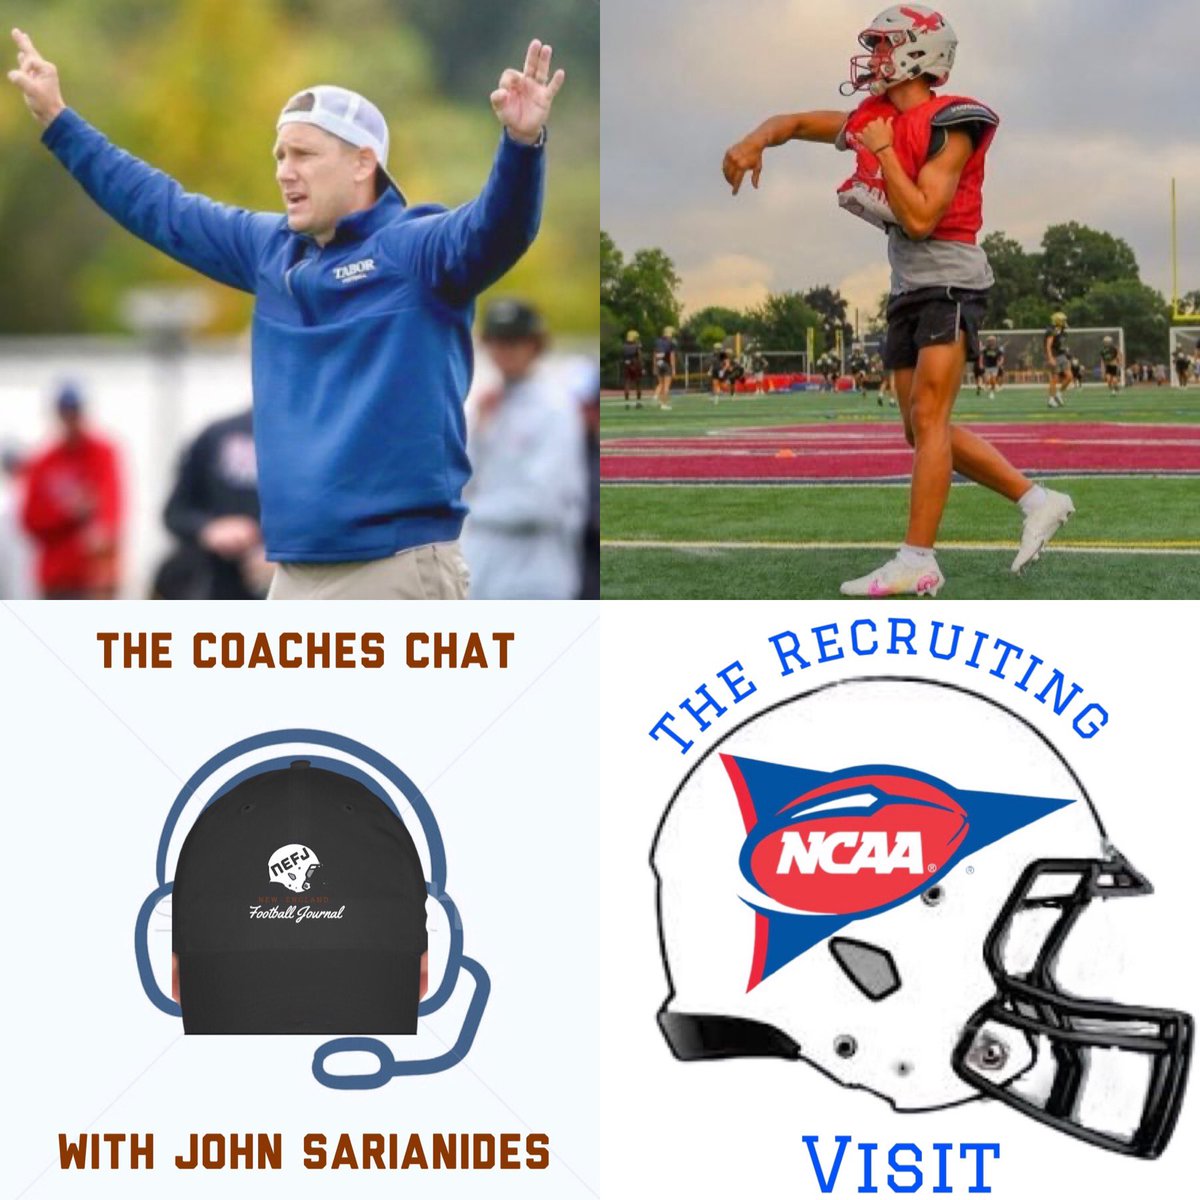 Coaches Chat and the Recruiting Visit are back tonight on our new night. Tabor Academy @CoachJeffMoore joins me at 8:15 pm. Hudson High School quarterback @jake_attaway joins me at 9 pm. Two great shows. Watch live on Facebook, Twitch, X and our YouTube page.